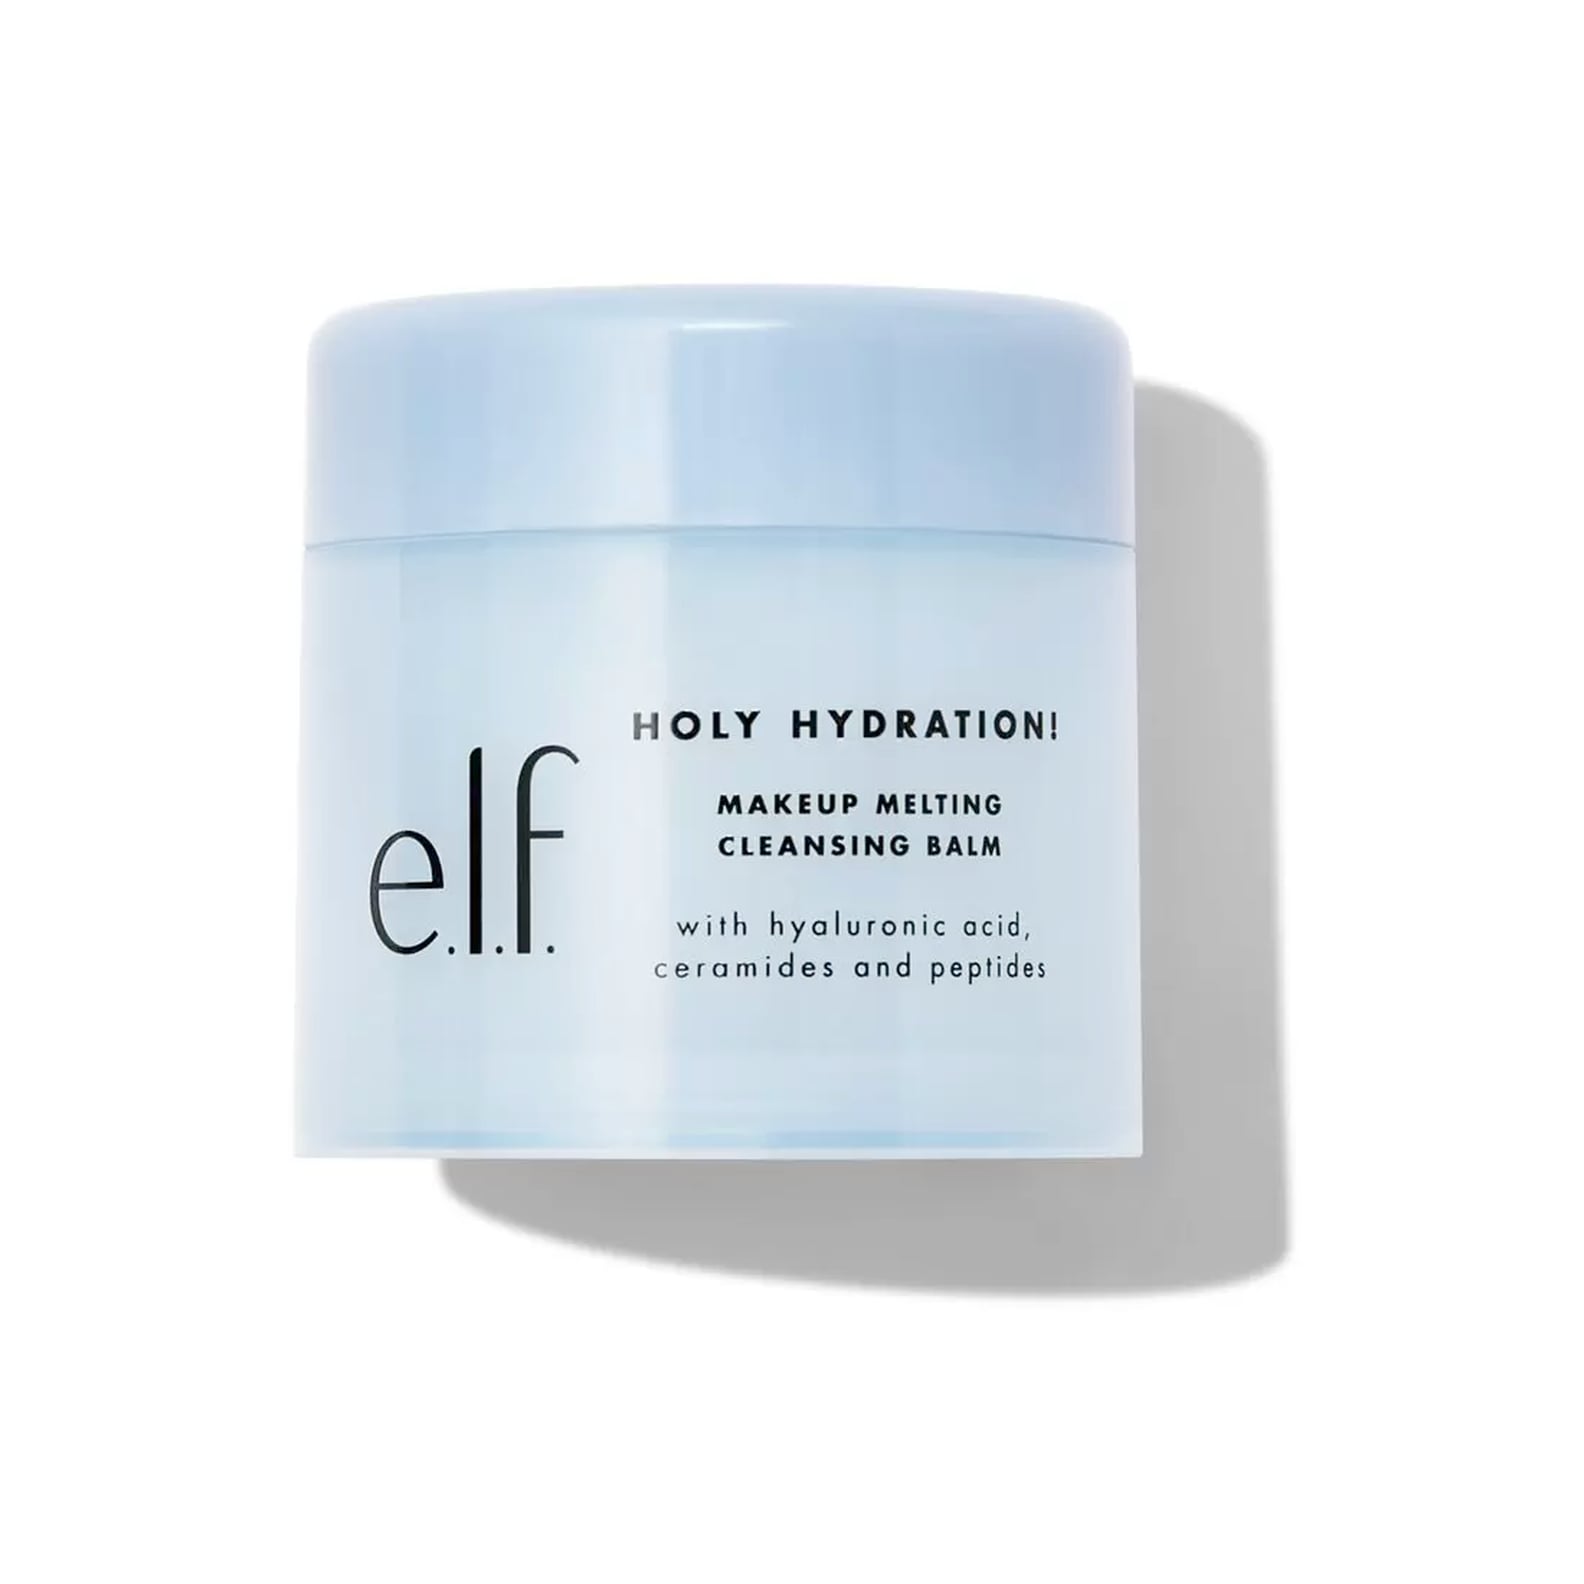 How to Layer Your e.l.f. Cosmetics Skin Care Products | POPSUGAR Beauty